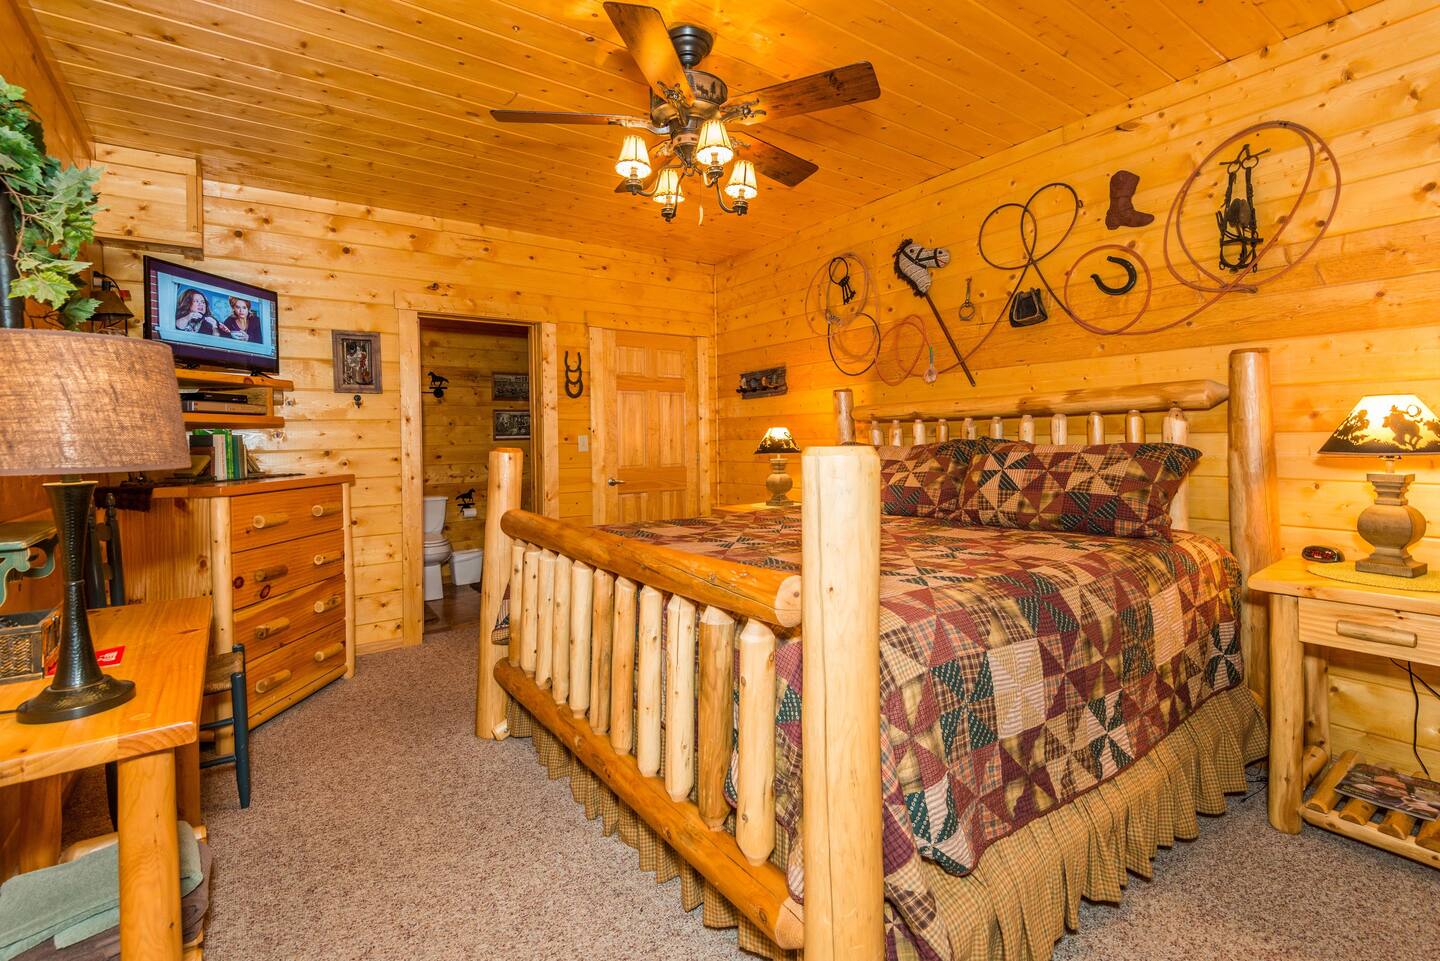 Fairytale Log Cabin bedroom with colorful sheet